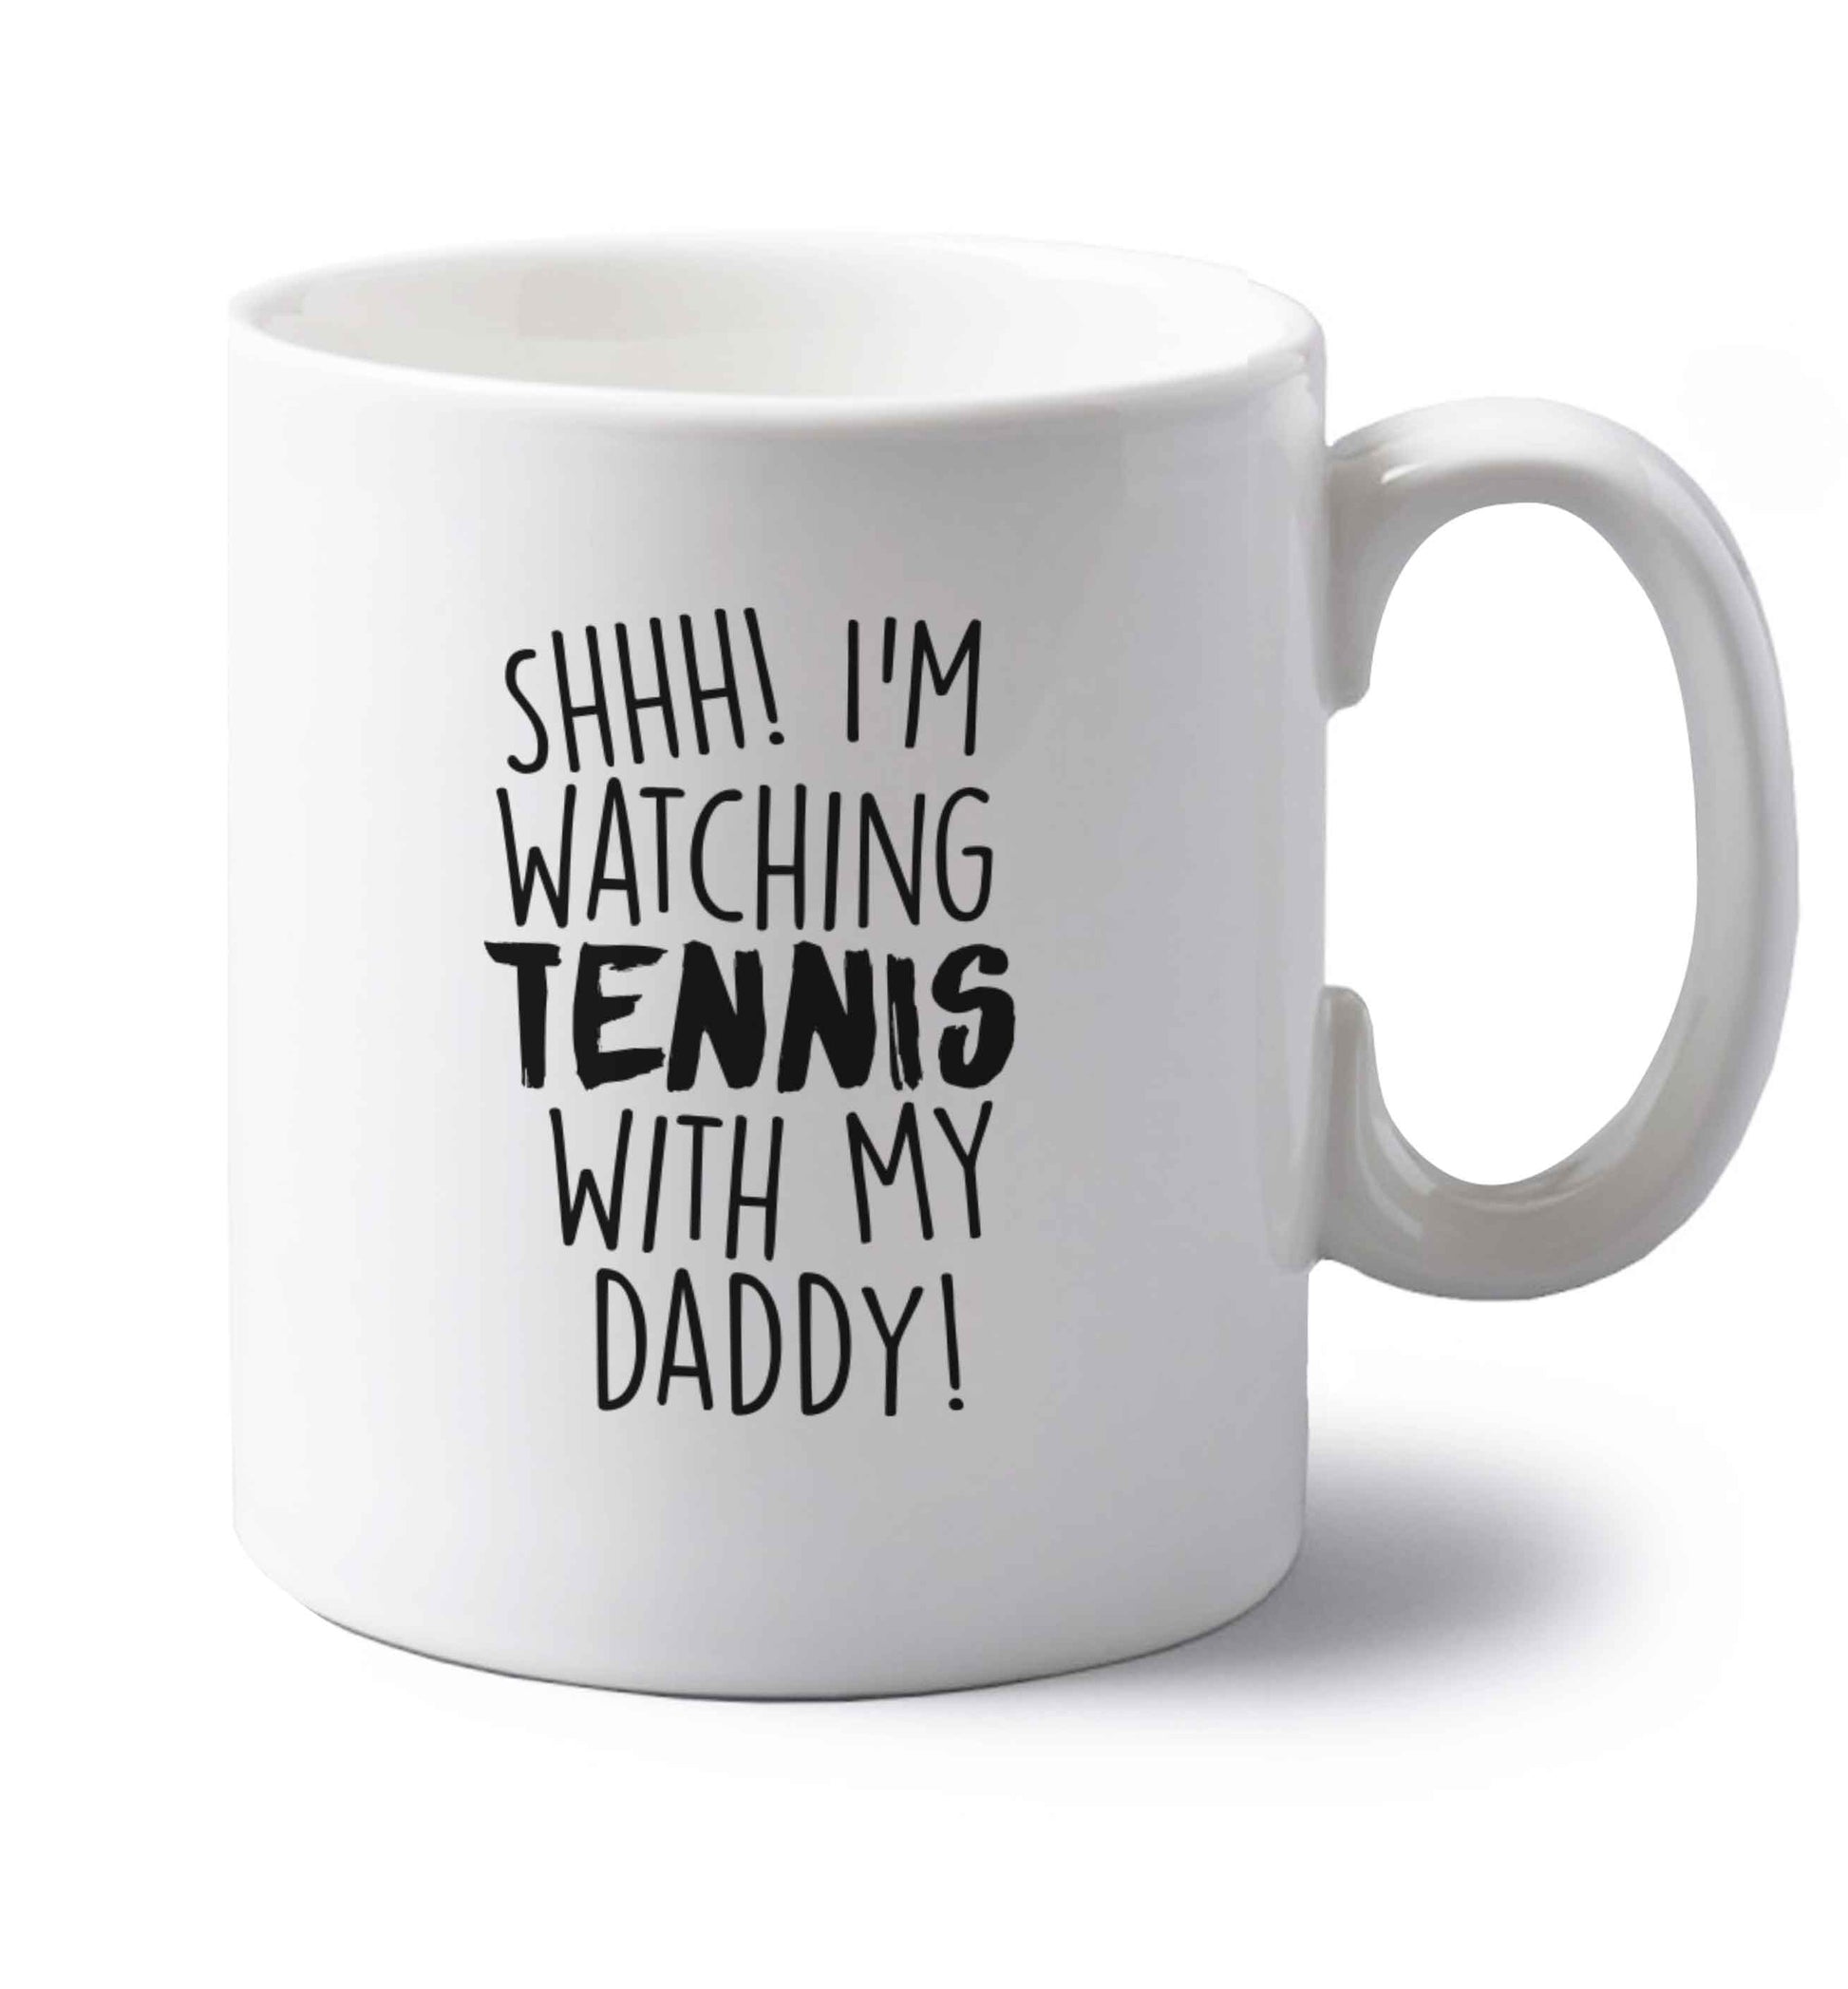 Shh! I'm watching tennis with my daddy! left handed white ceramic mug 